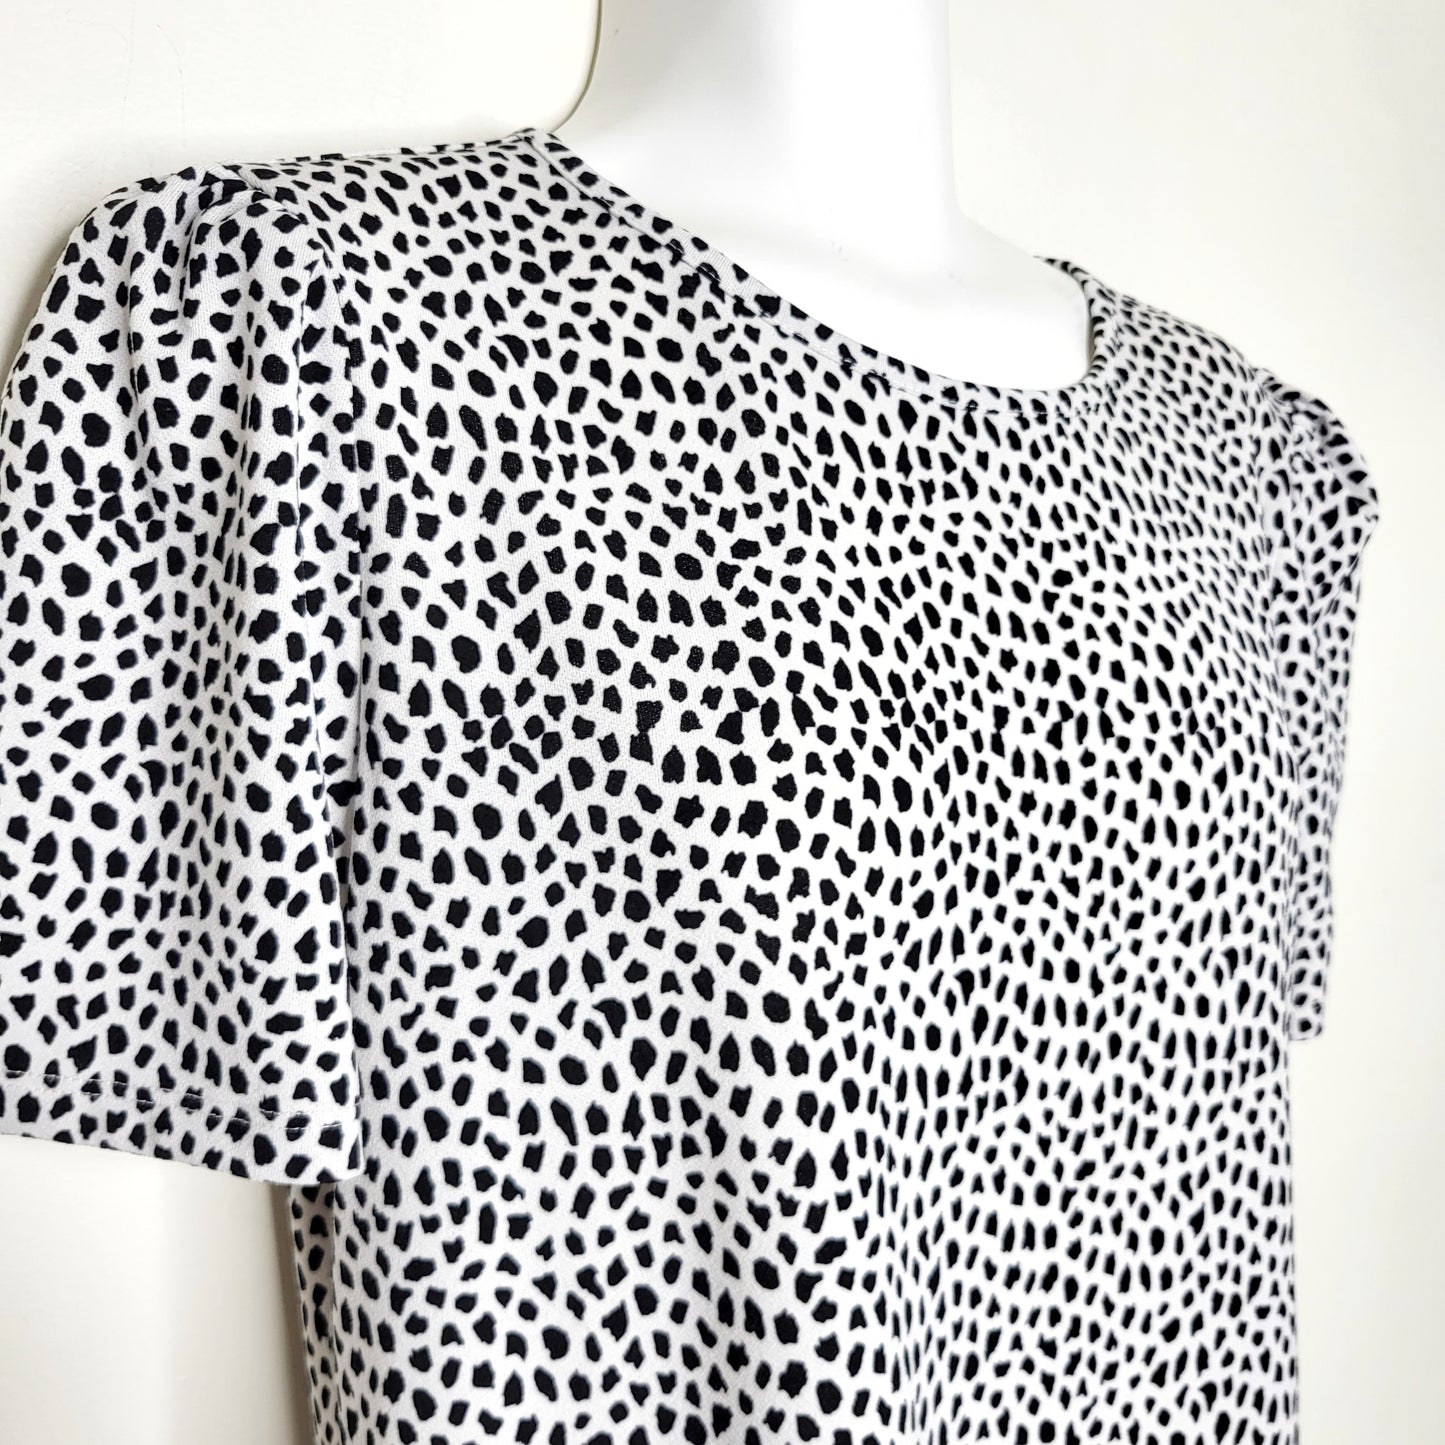 PMOR11 - George black and white patterned top, size large, good condition